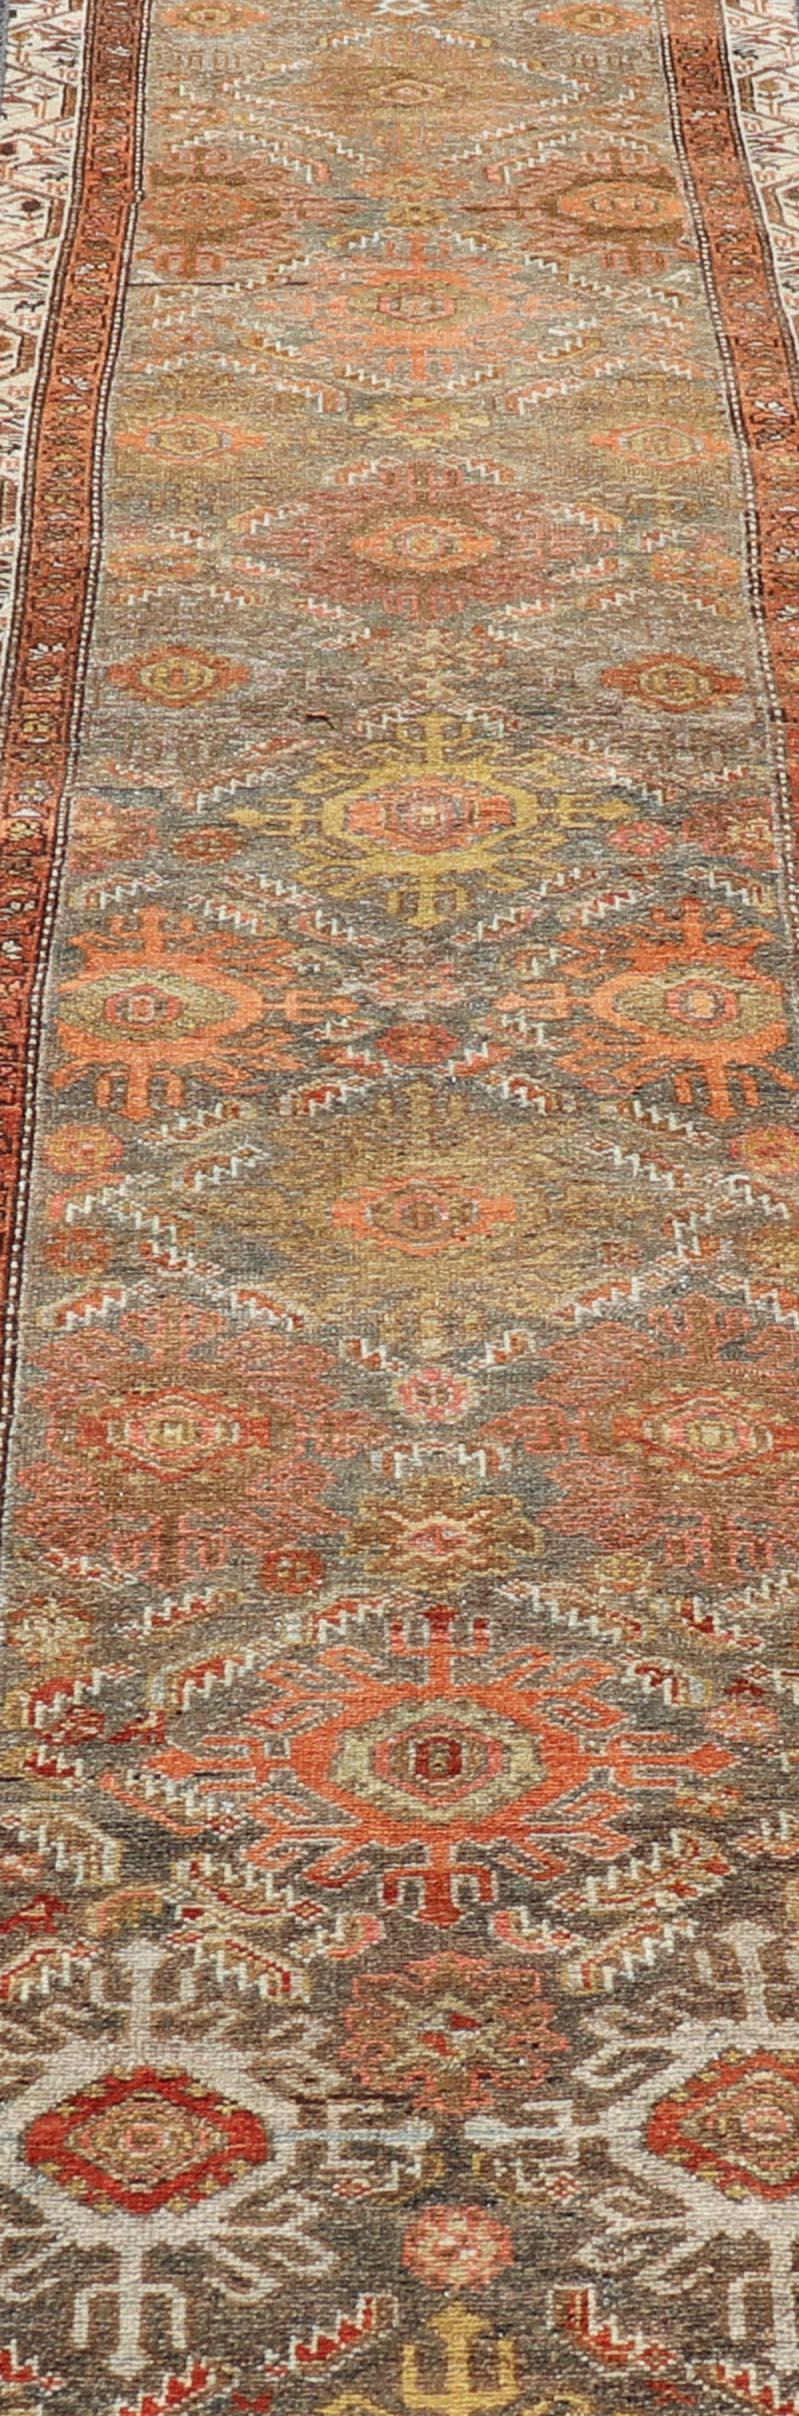 Wool Antique Persian Hamadan Long Runner in Brown, Gray and Earth Tones For Sale